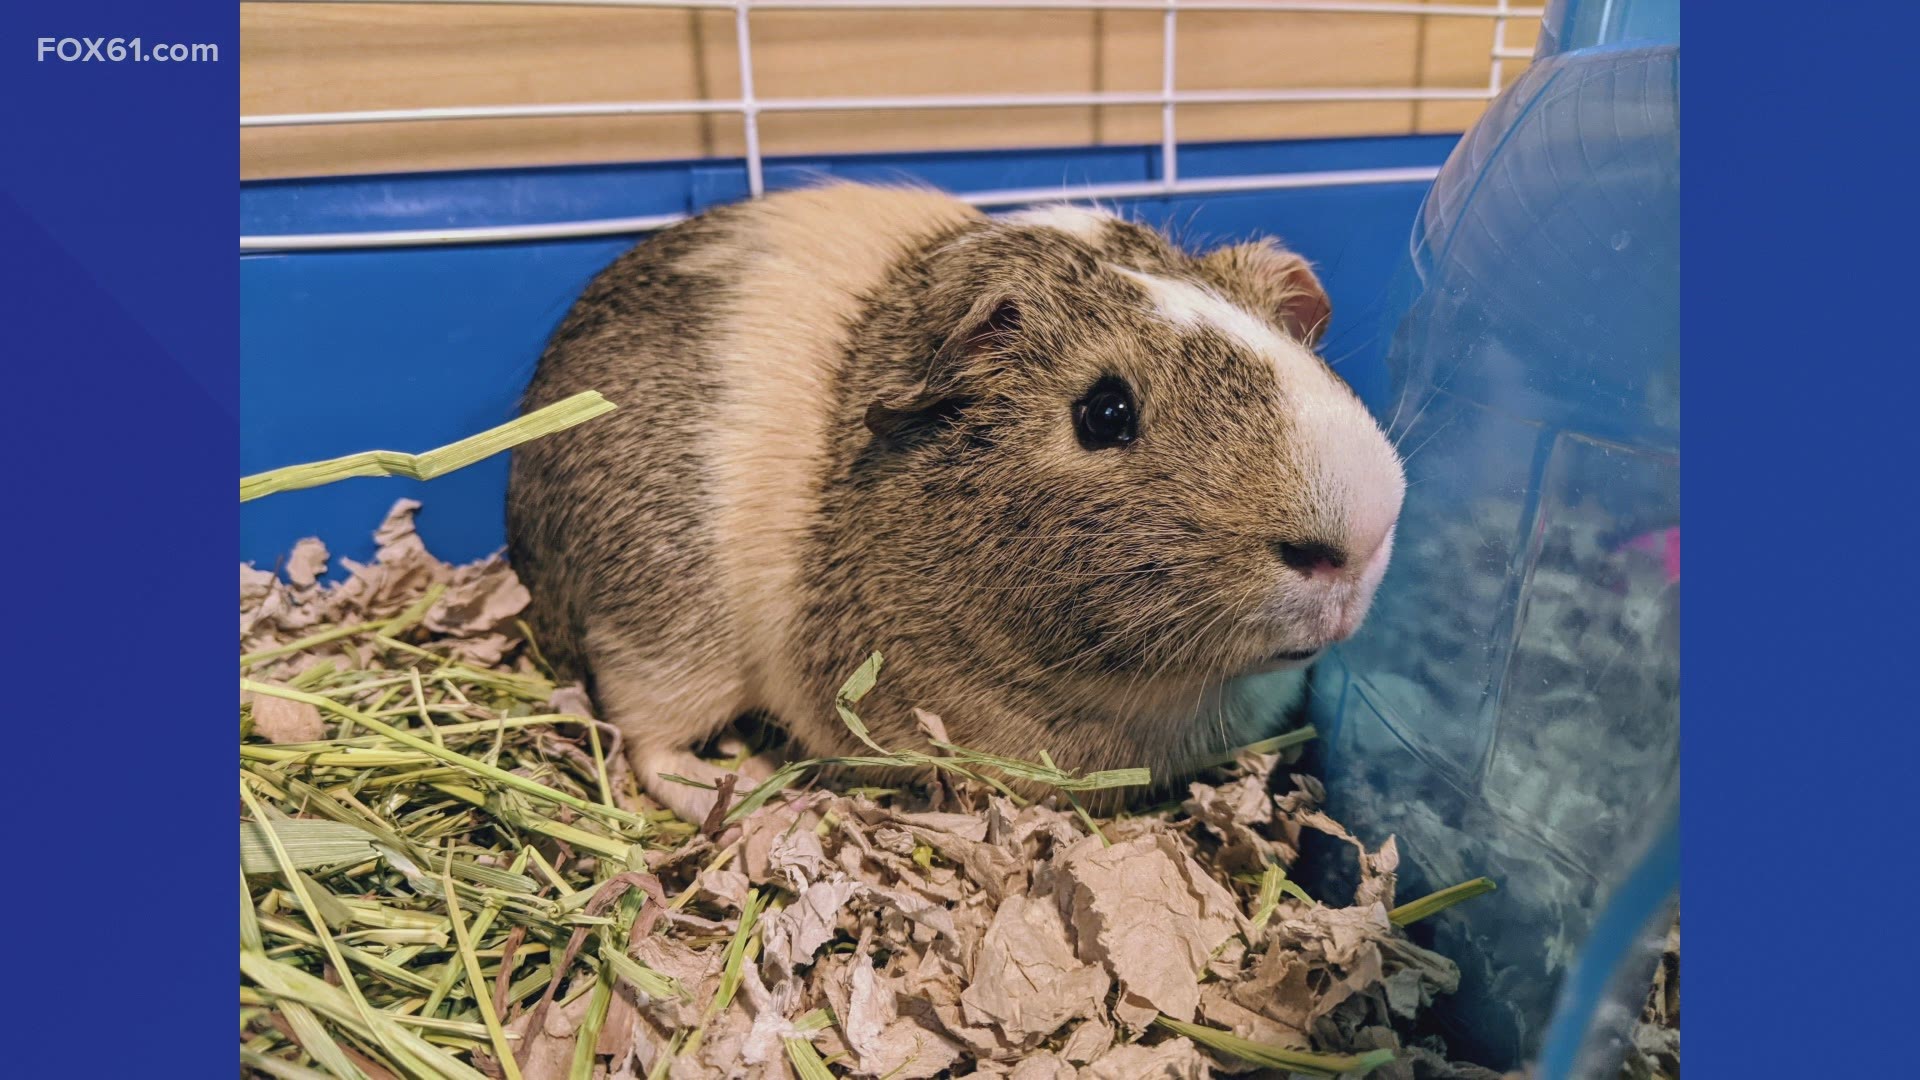 Oscar is easy to handle and is the father to three baby guinea pigs!